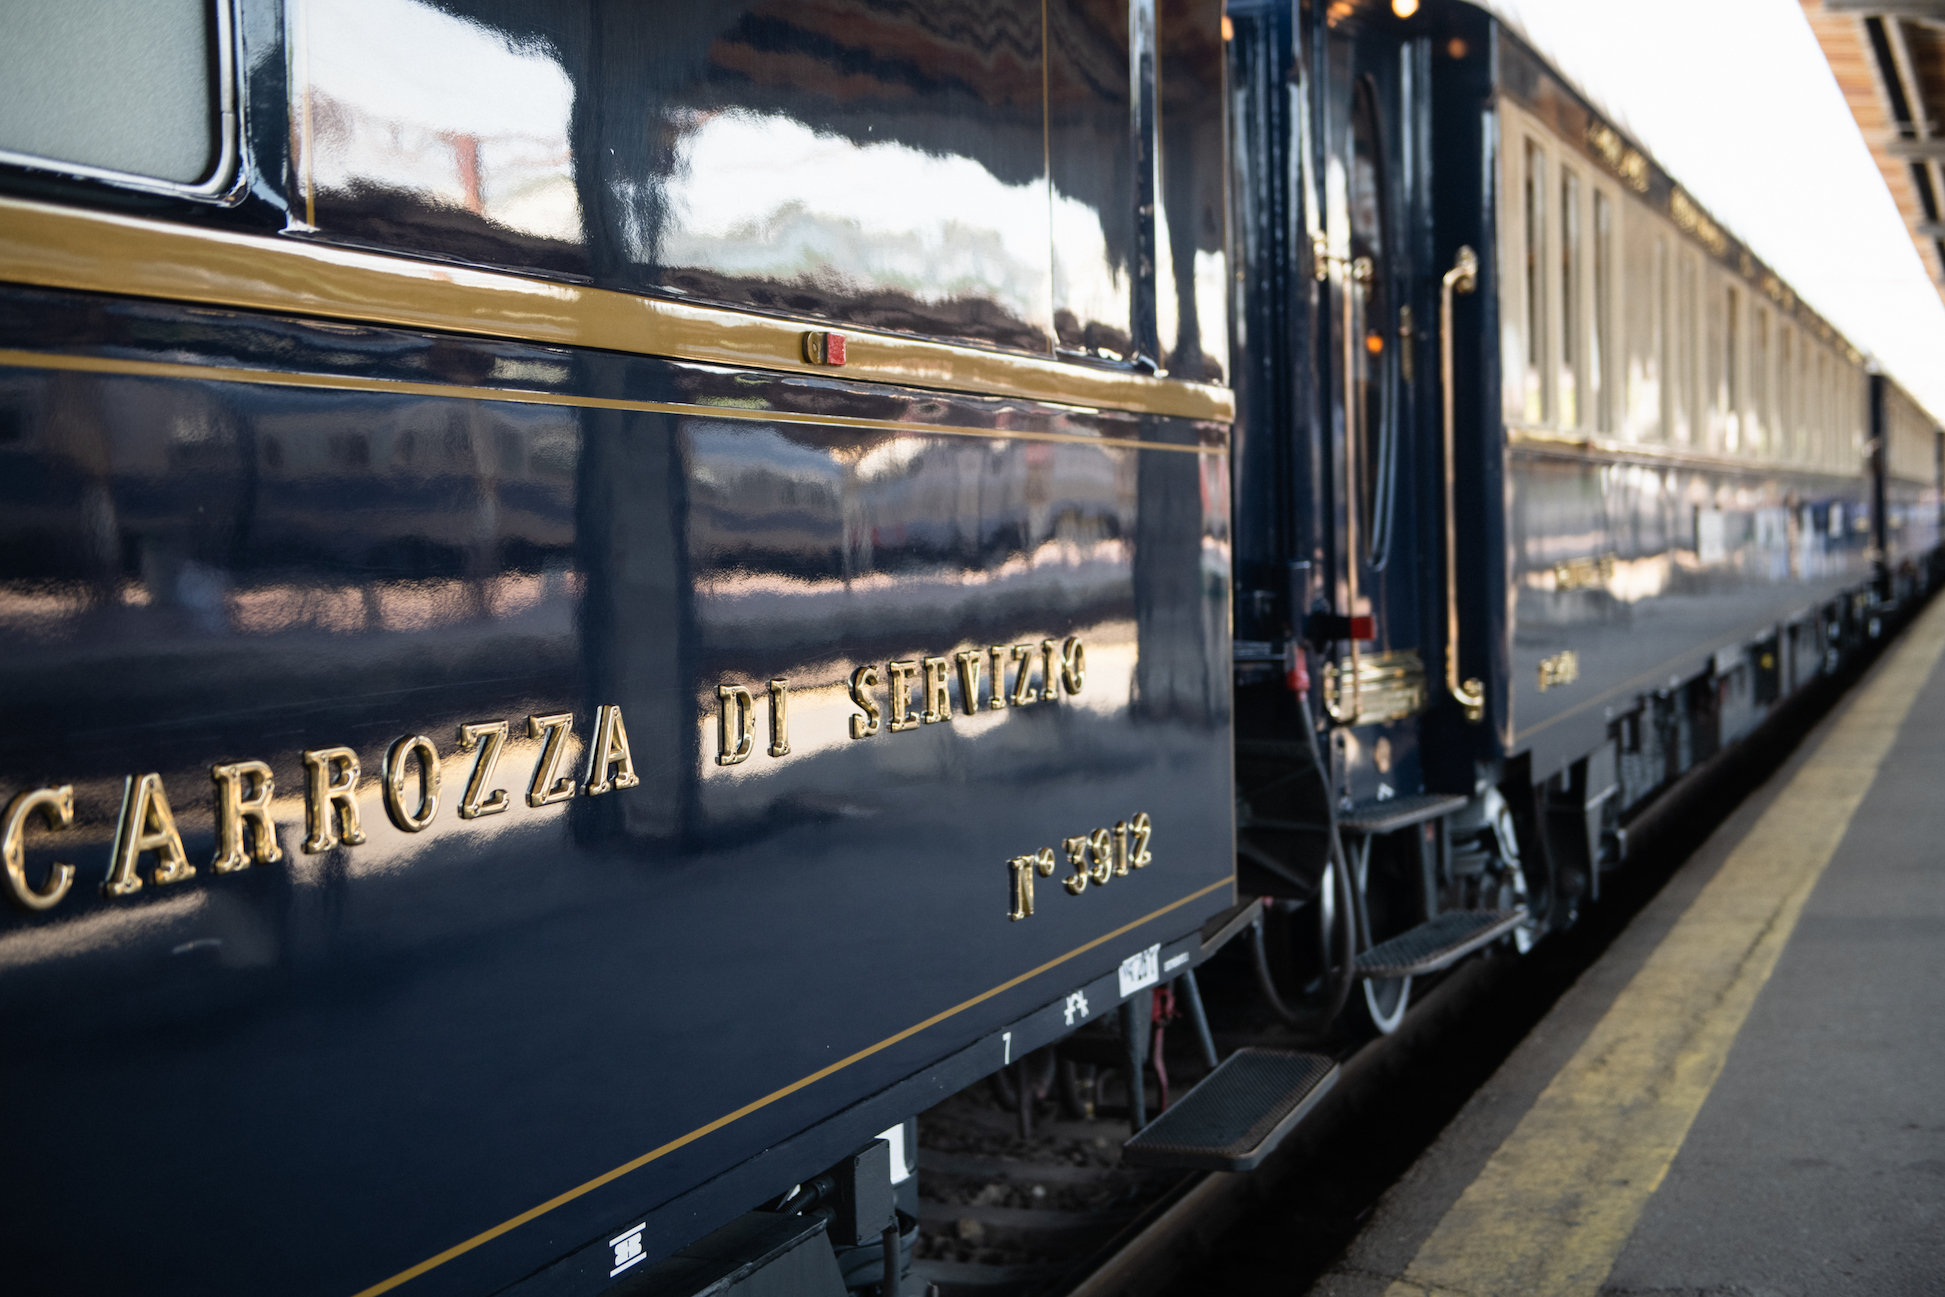 Orient Express to abandon London: what does this mean for